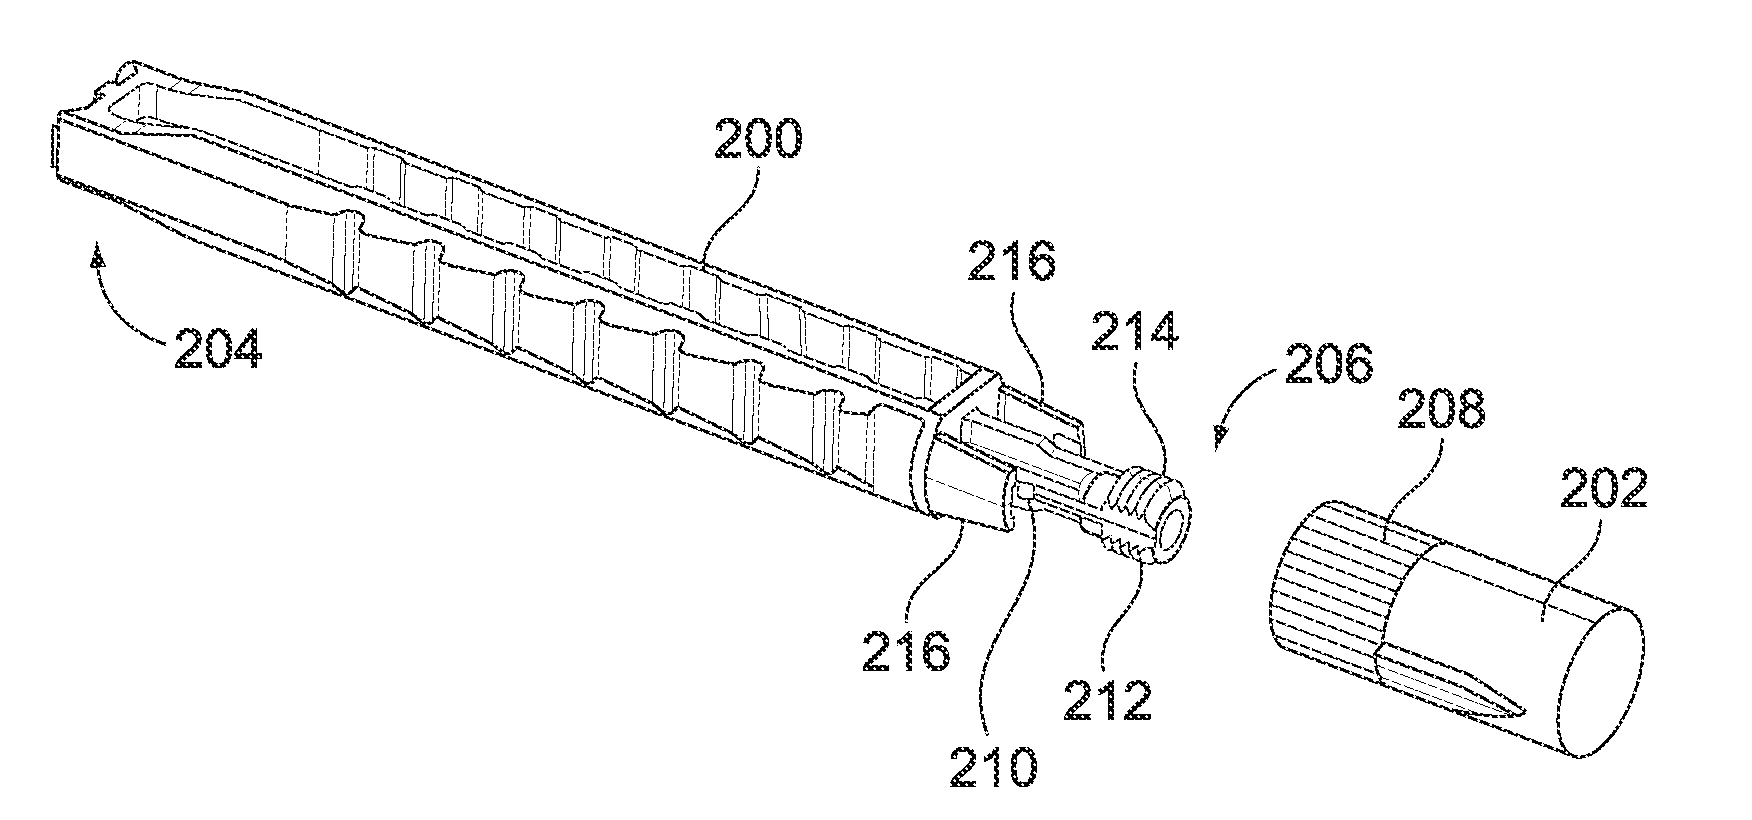 Piston rod assembly for a drug delivery device